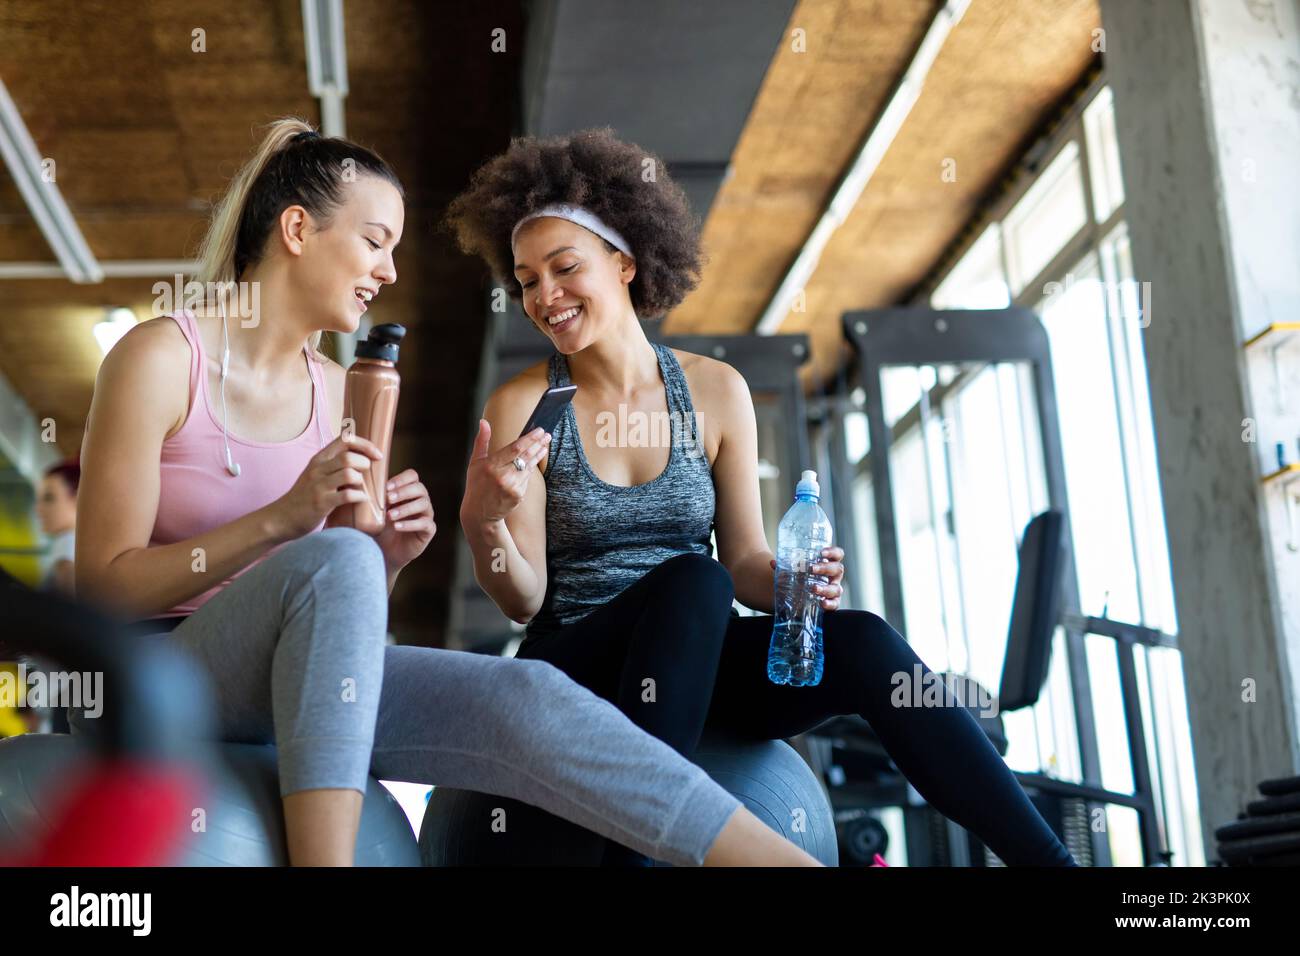 Beautiful women working out in gym together to stay healthy. Sport, people, friend concept. Stock Photo